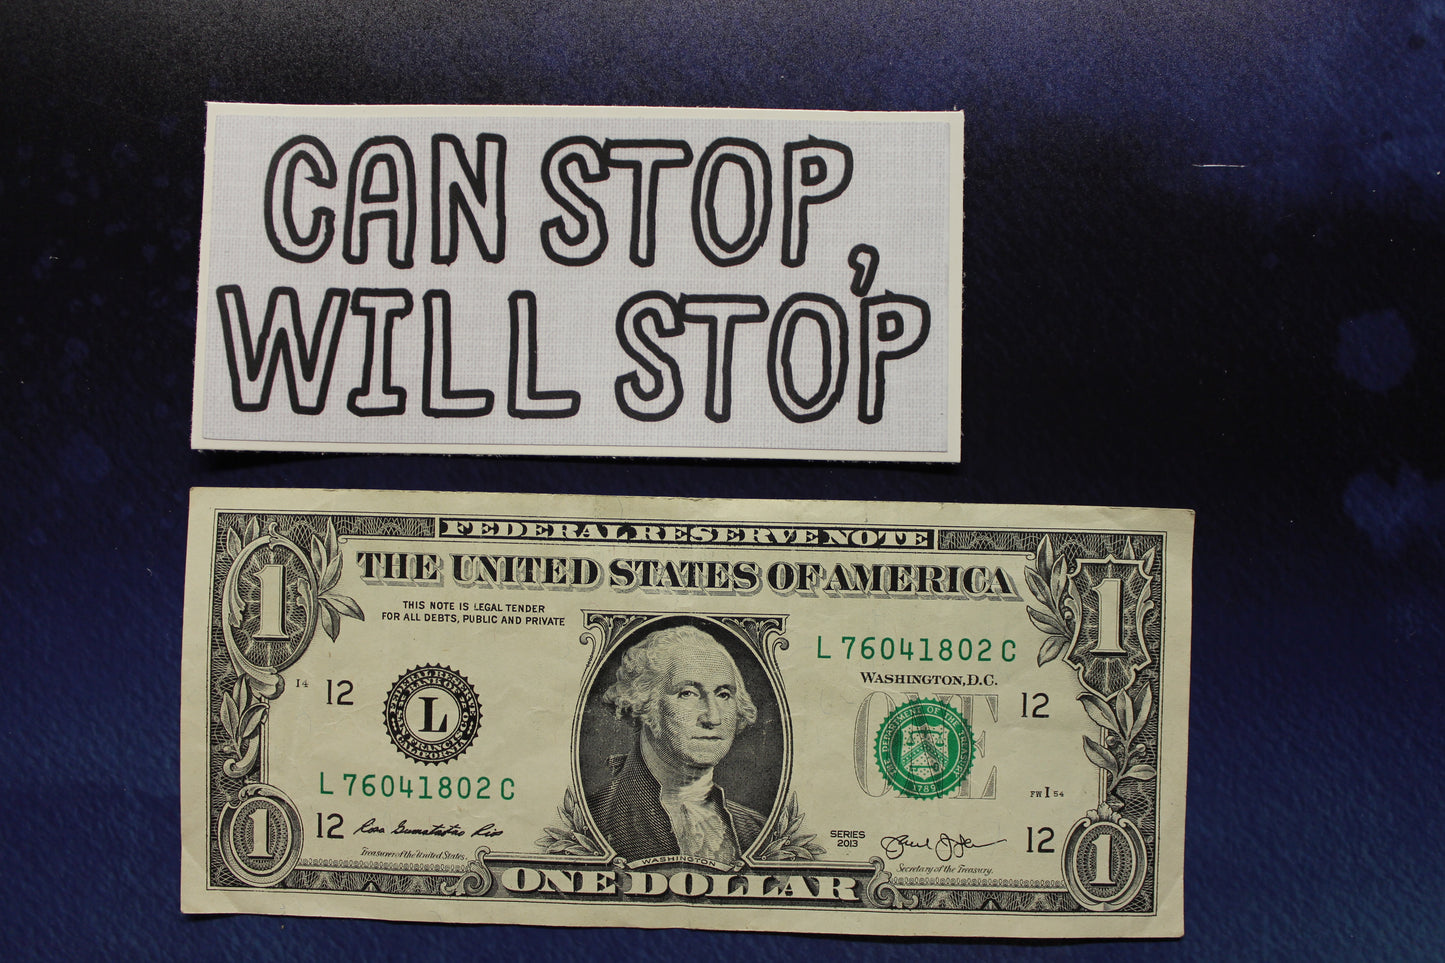 Can Stop, Will Stop Vinyl Sticker